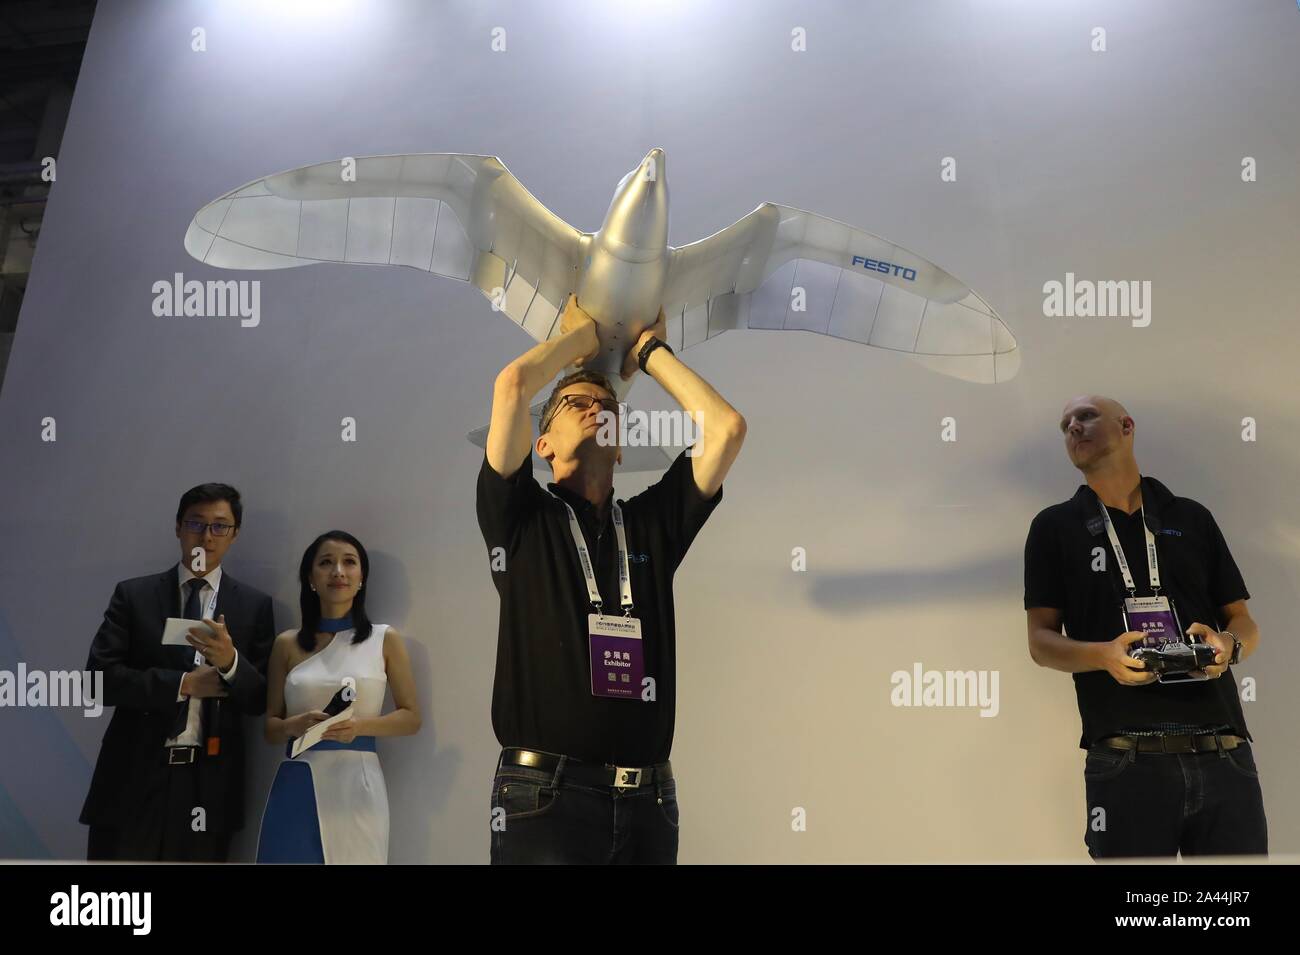 A bird-like drone developed by Festo is displayed during the 2019 Word Robot Conference (WRC) in Beijing, China, 20 August 2019.   The 2019 Word Robot Stock Photo